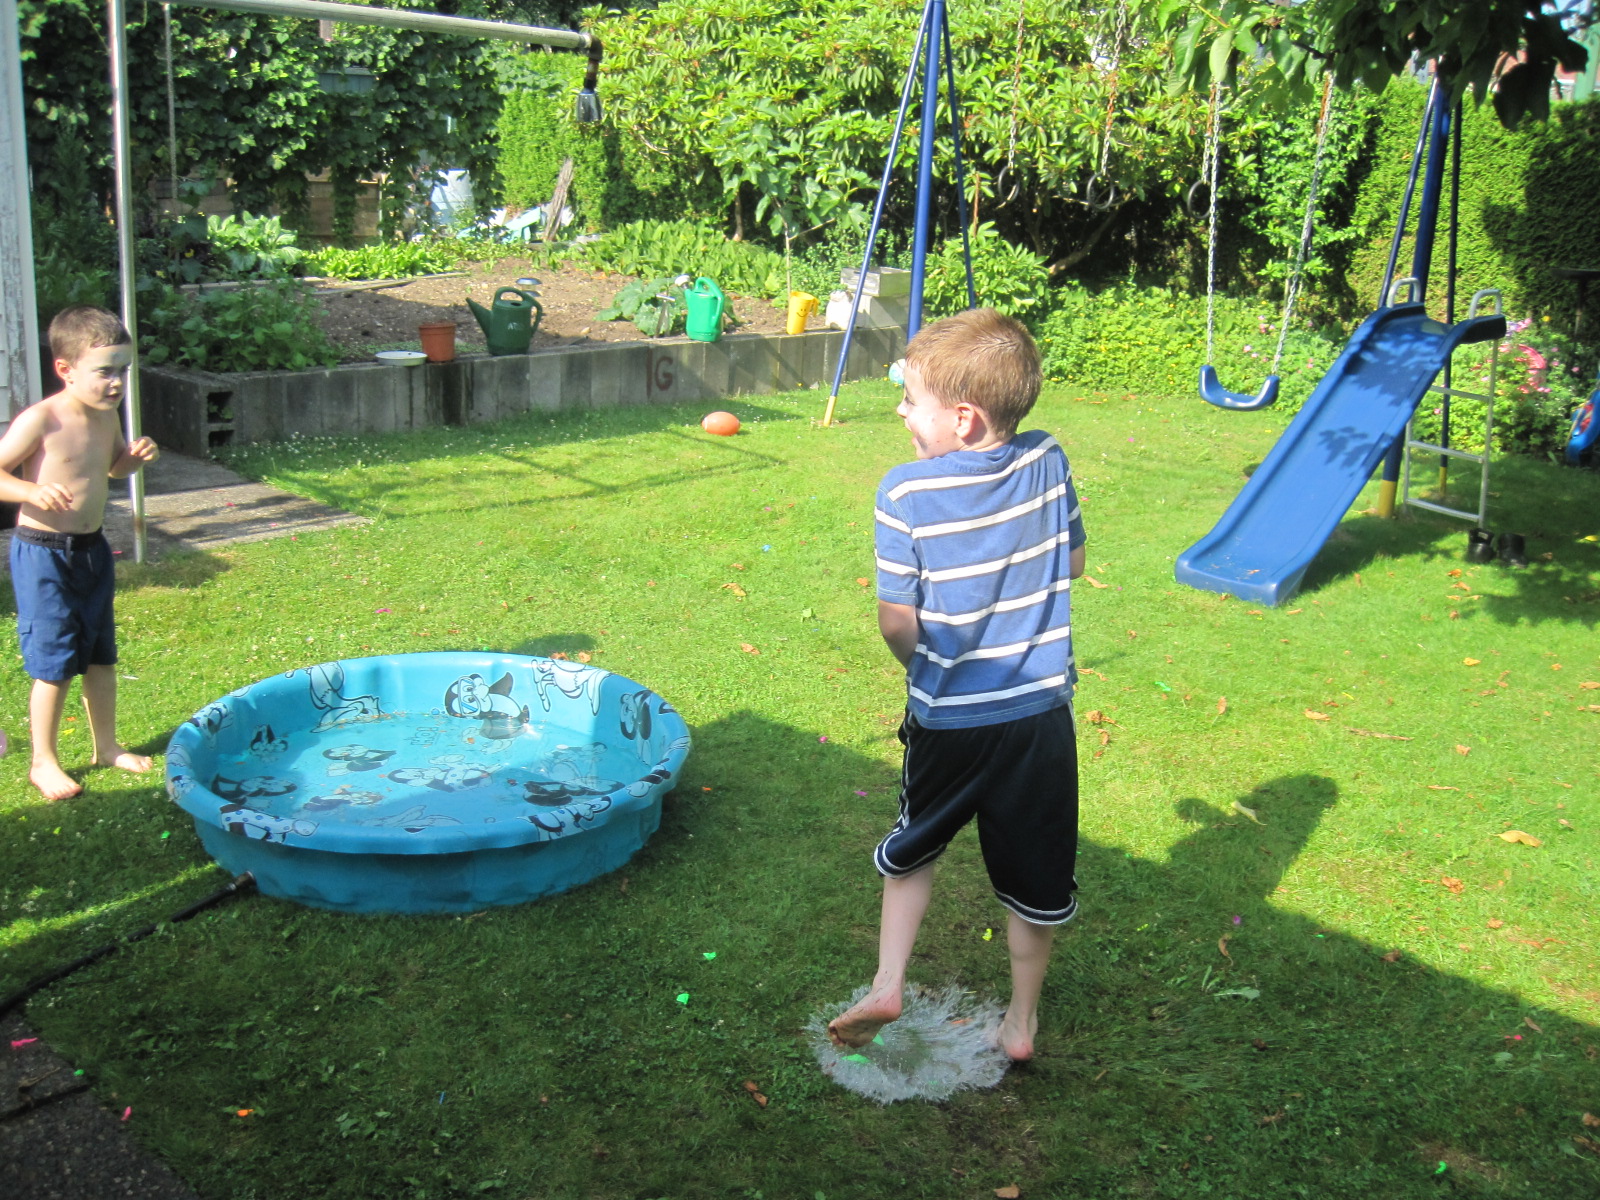 This shot captures the moment of water balloon impact at Arlo's feet. Cool, huh?